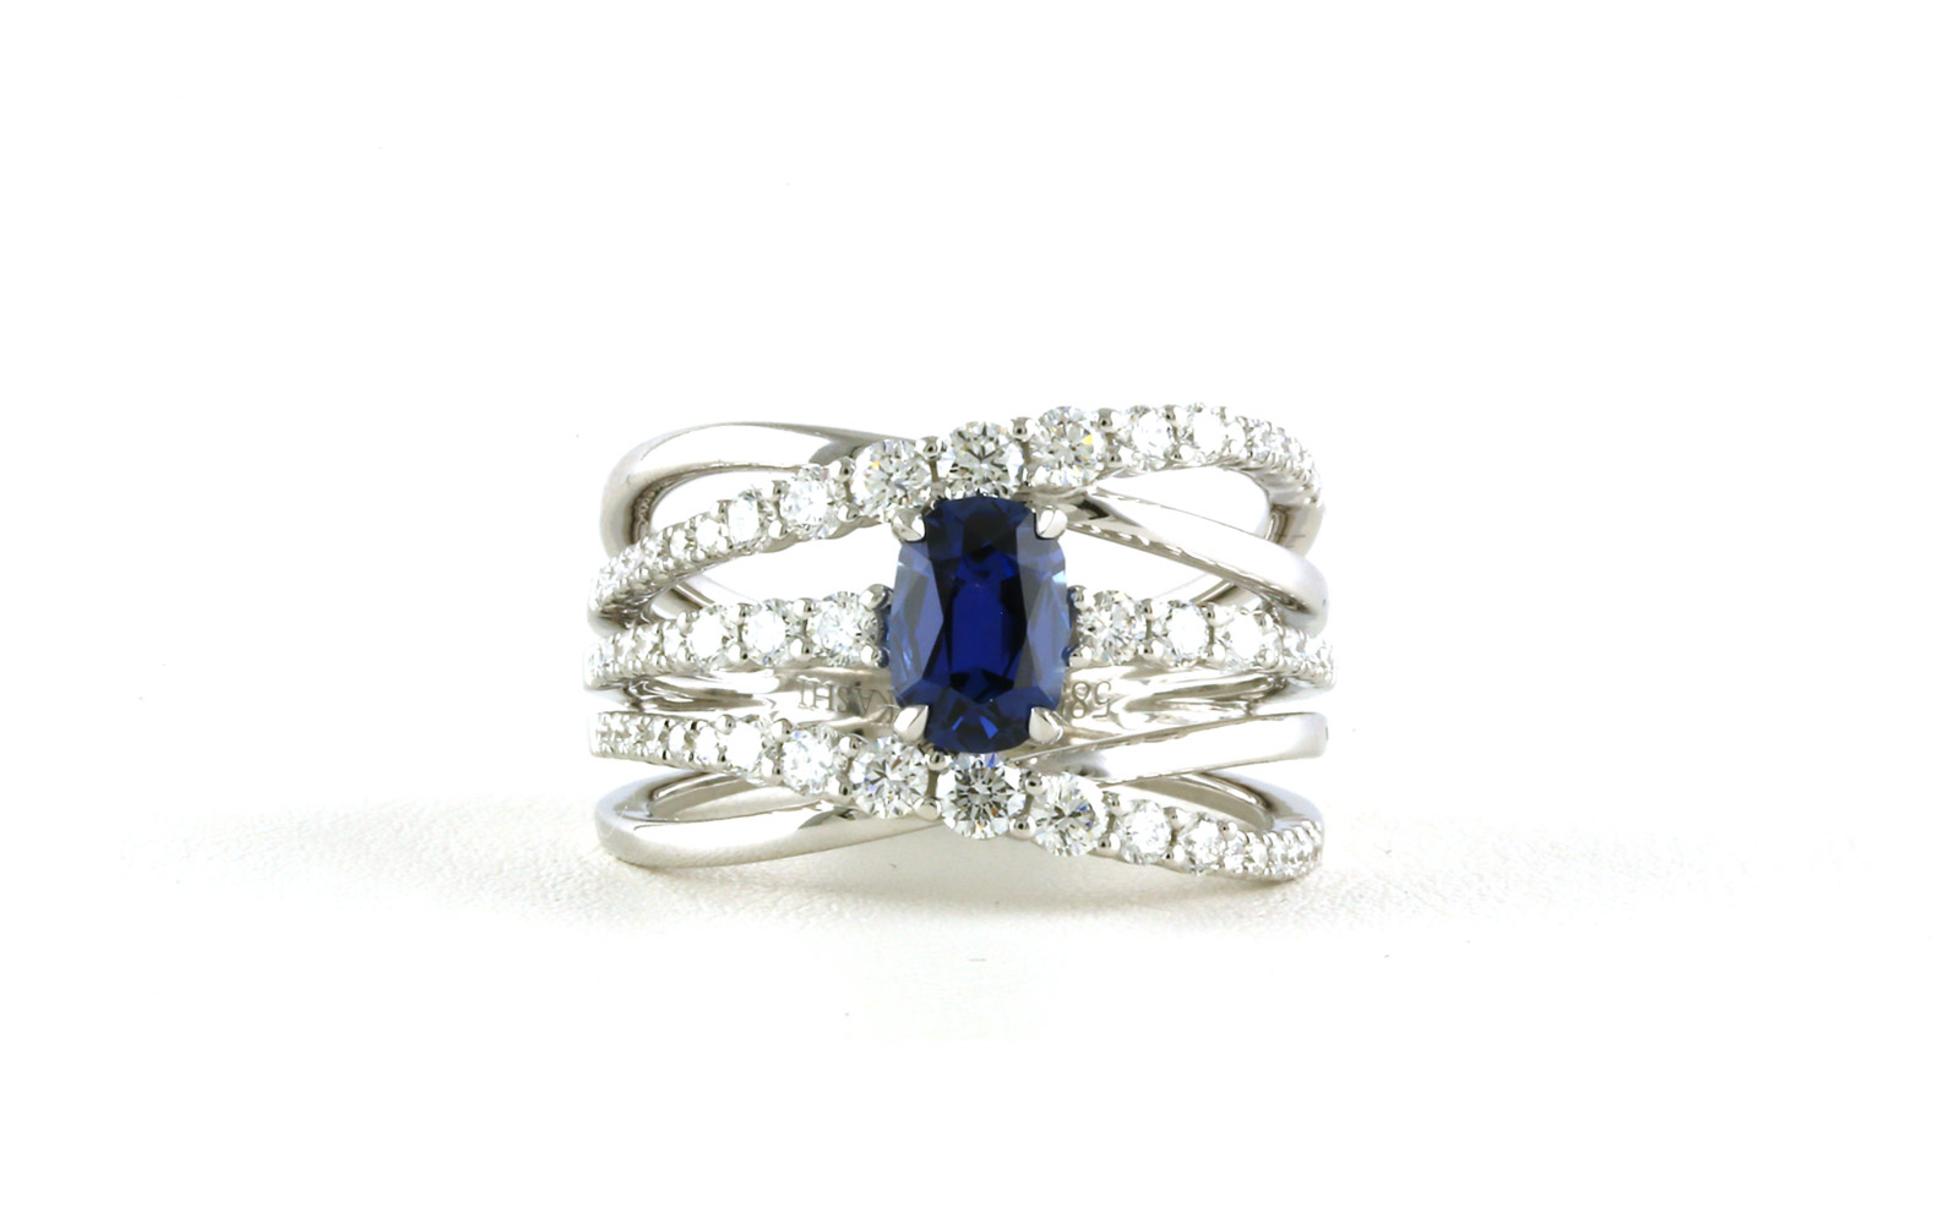 Wide 5-Row Crossover Oval Montana Yogo Sapphire and Diamond Ring in White Gold